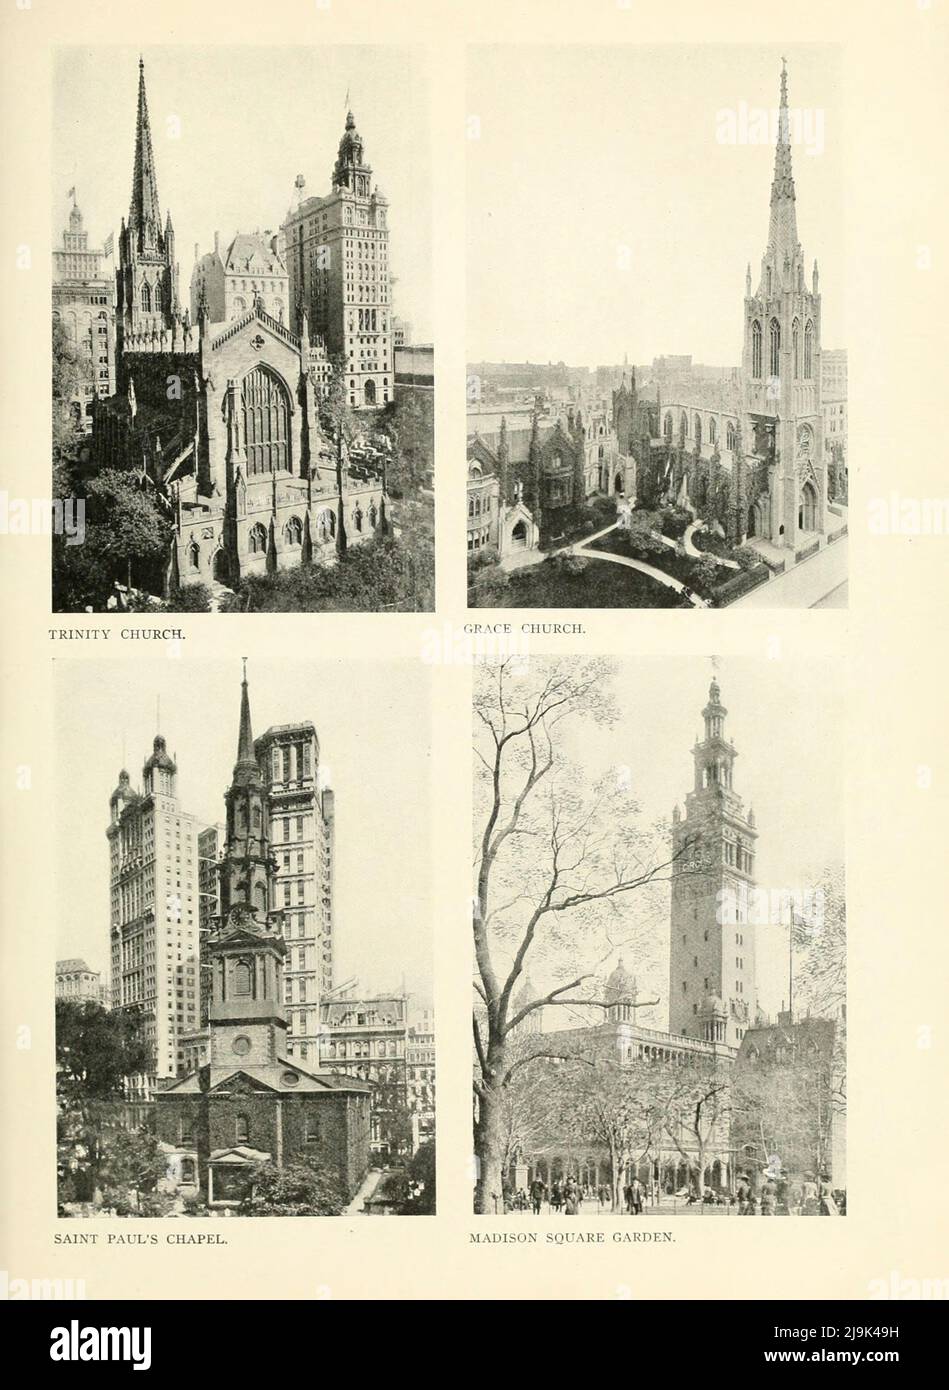 Trinity Church; Grace Church; Saint Paul's Chapel; Madison Square Garden from the book ' New York illustrated ' Publication date 1911 Publisher New York : Success Postal Card Co. Stock Photo